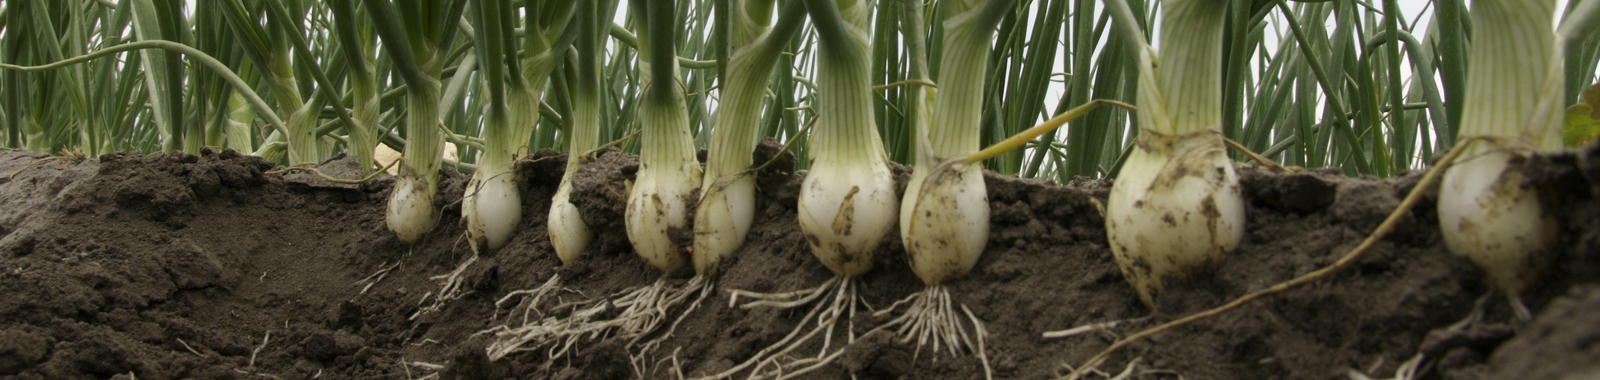 Agronomic Principles in Onion